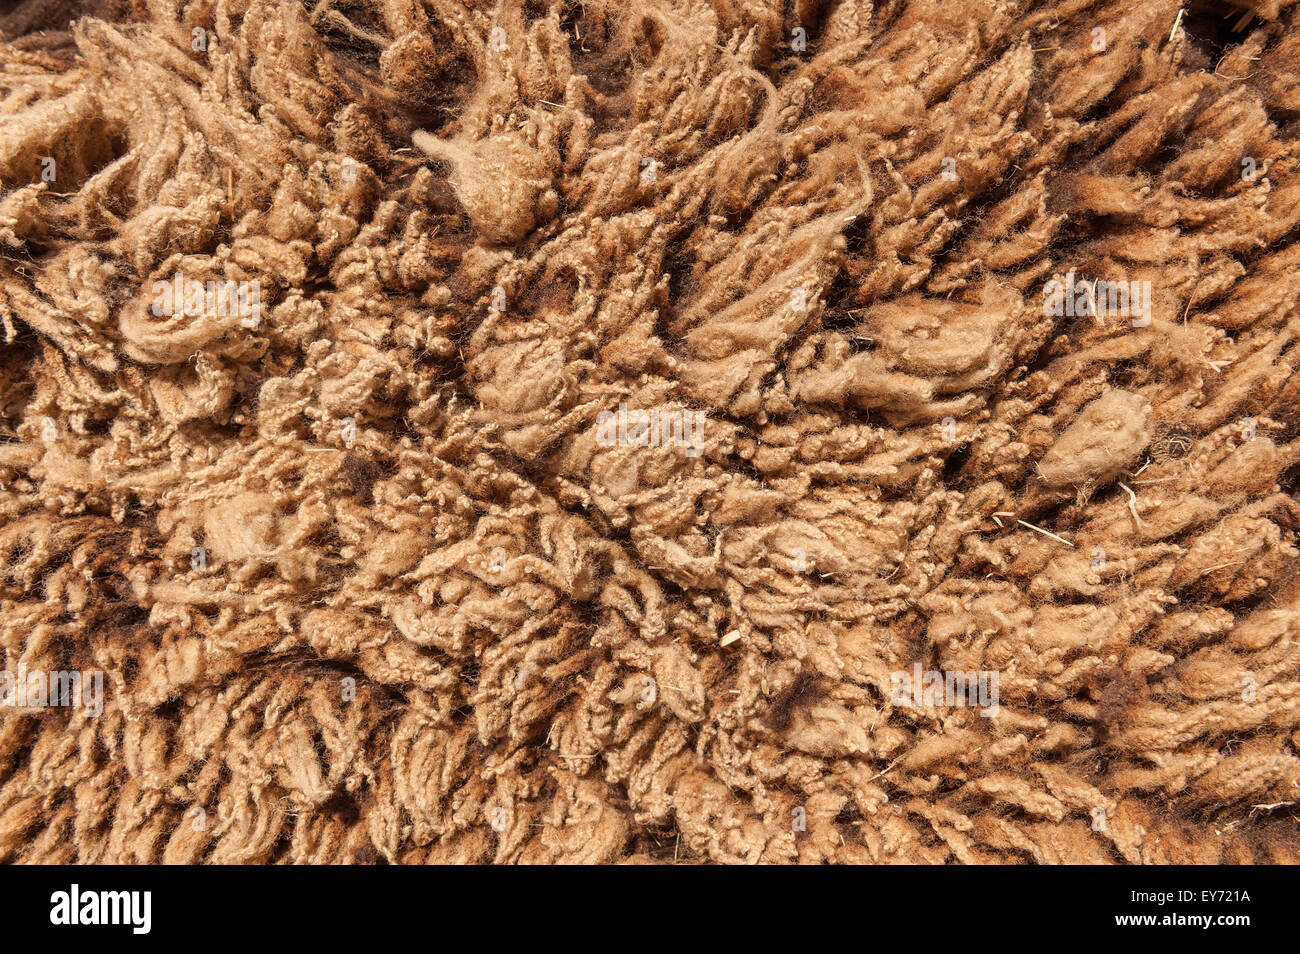 one year growth, a Shetland sheep wool coat close up before its sheared showing varied texture very soft and well crimped fleece Stock Photo